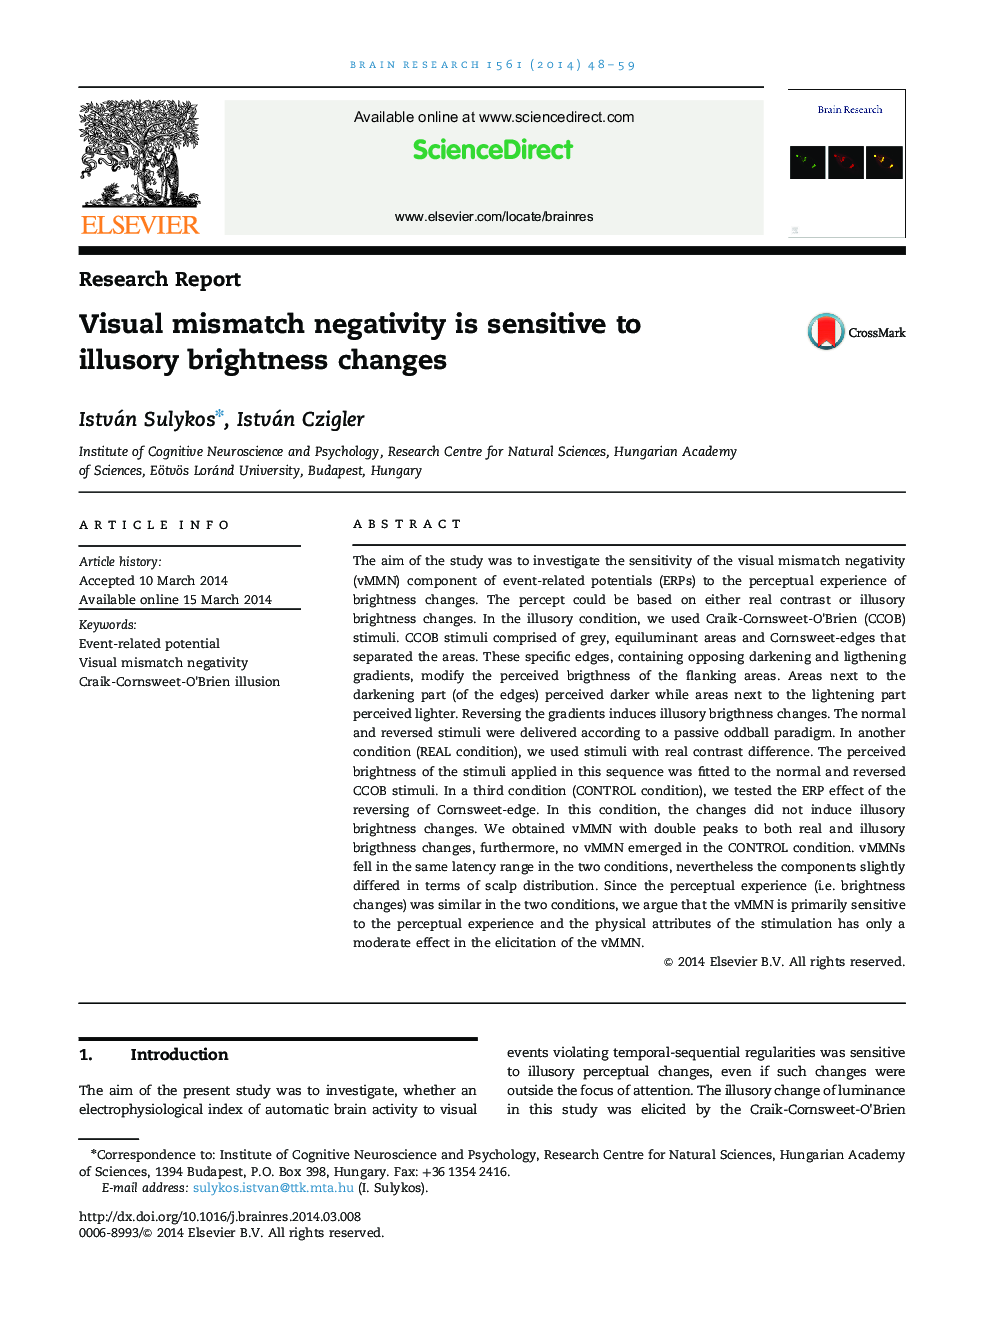 Research ReportVisual mismatch negativity is sensitive to illusory brightness changes